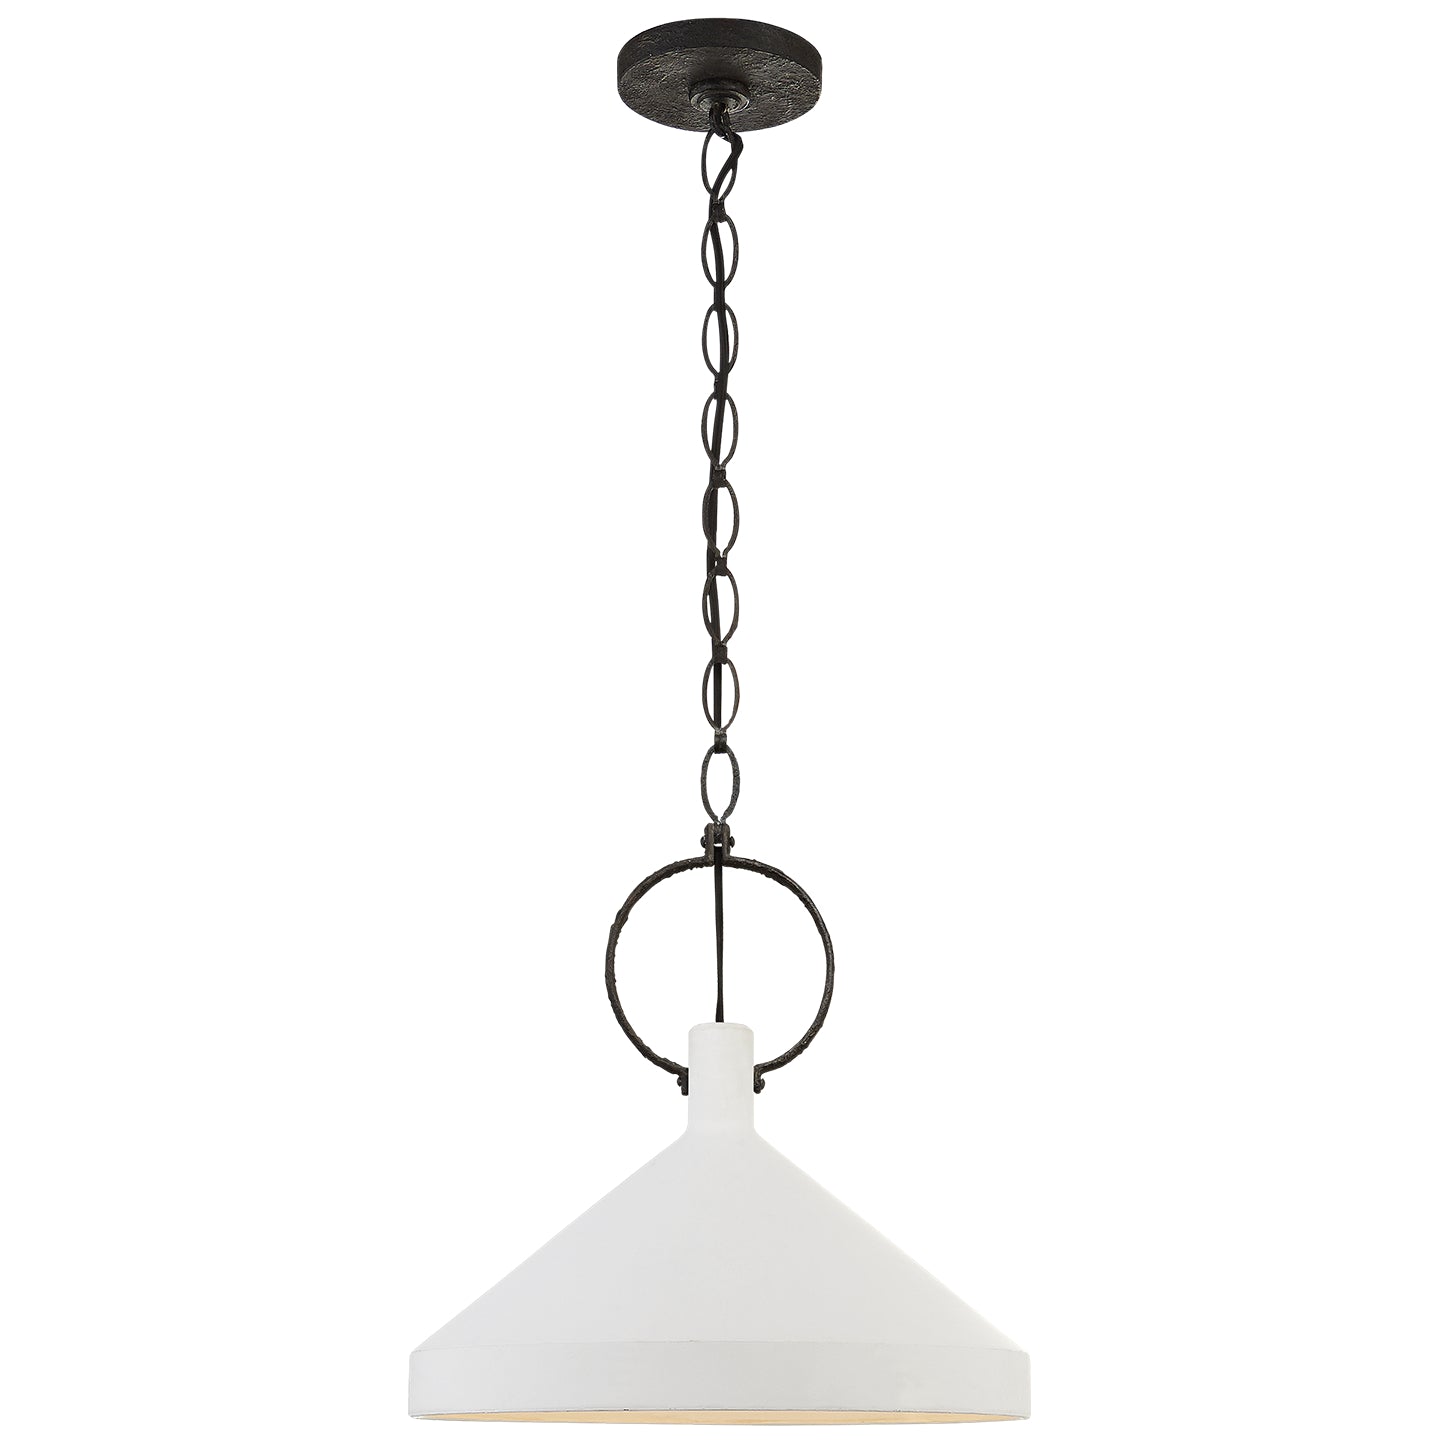 Visual Comfort Signature - SK 5363NR-PW - One Light Pendant - Limoges - Natural Rusted Iron